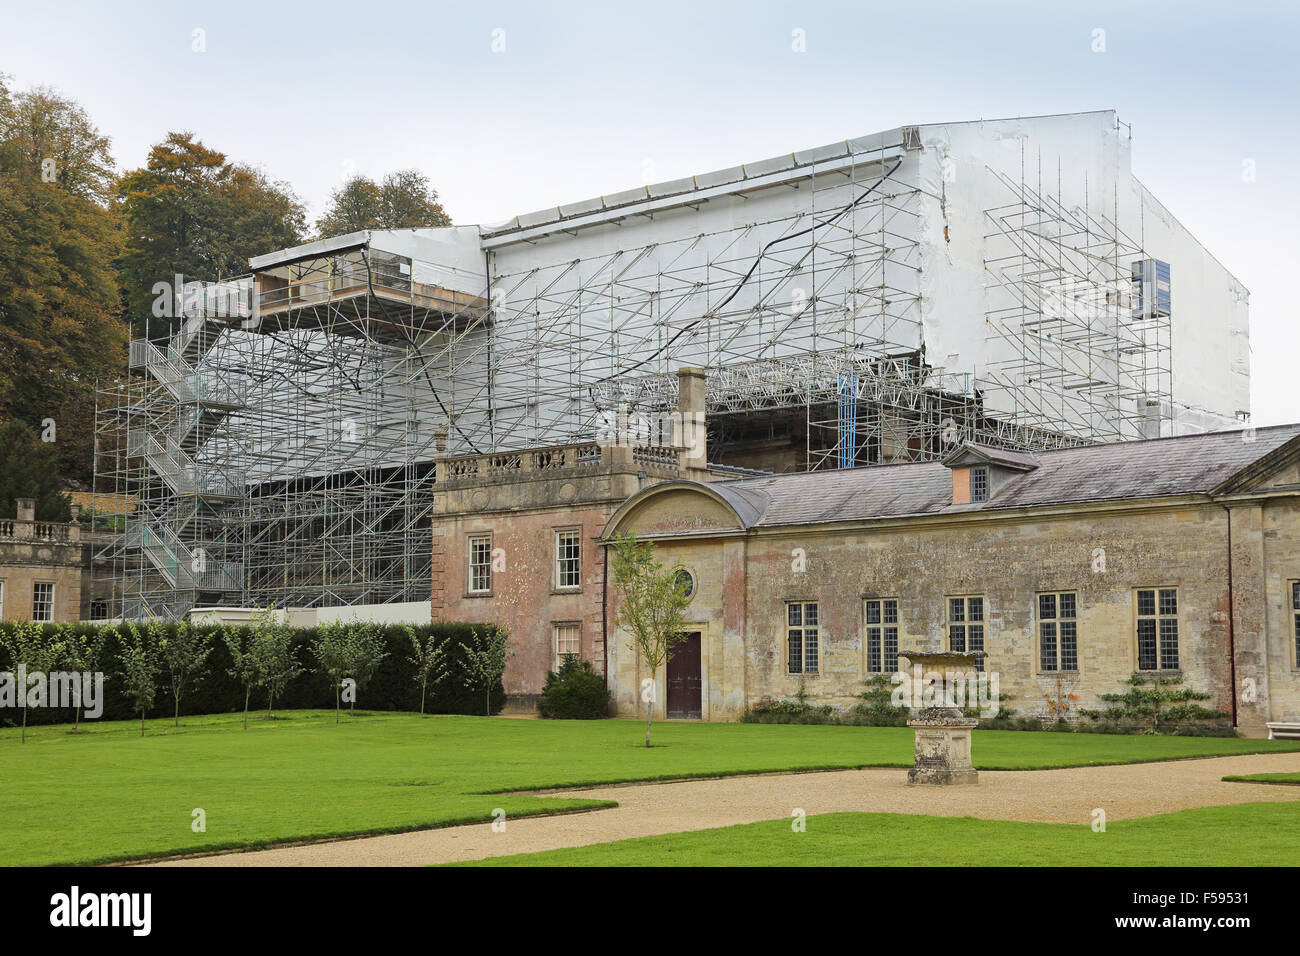 A protective scaffolding structure encloses Dyrham House, a stately home near Bath during major refurbishment work in 2015 Stock Photo